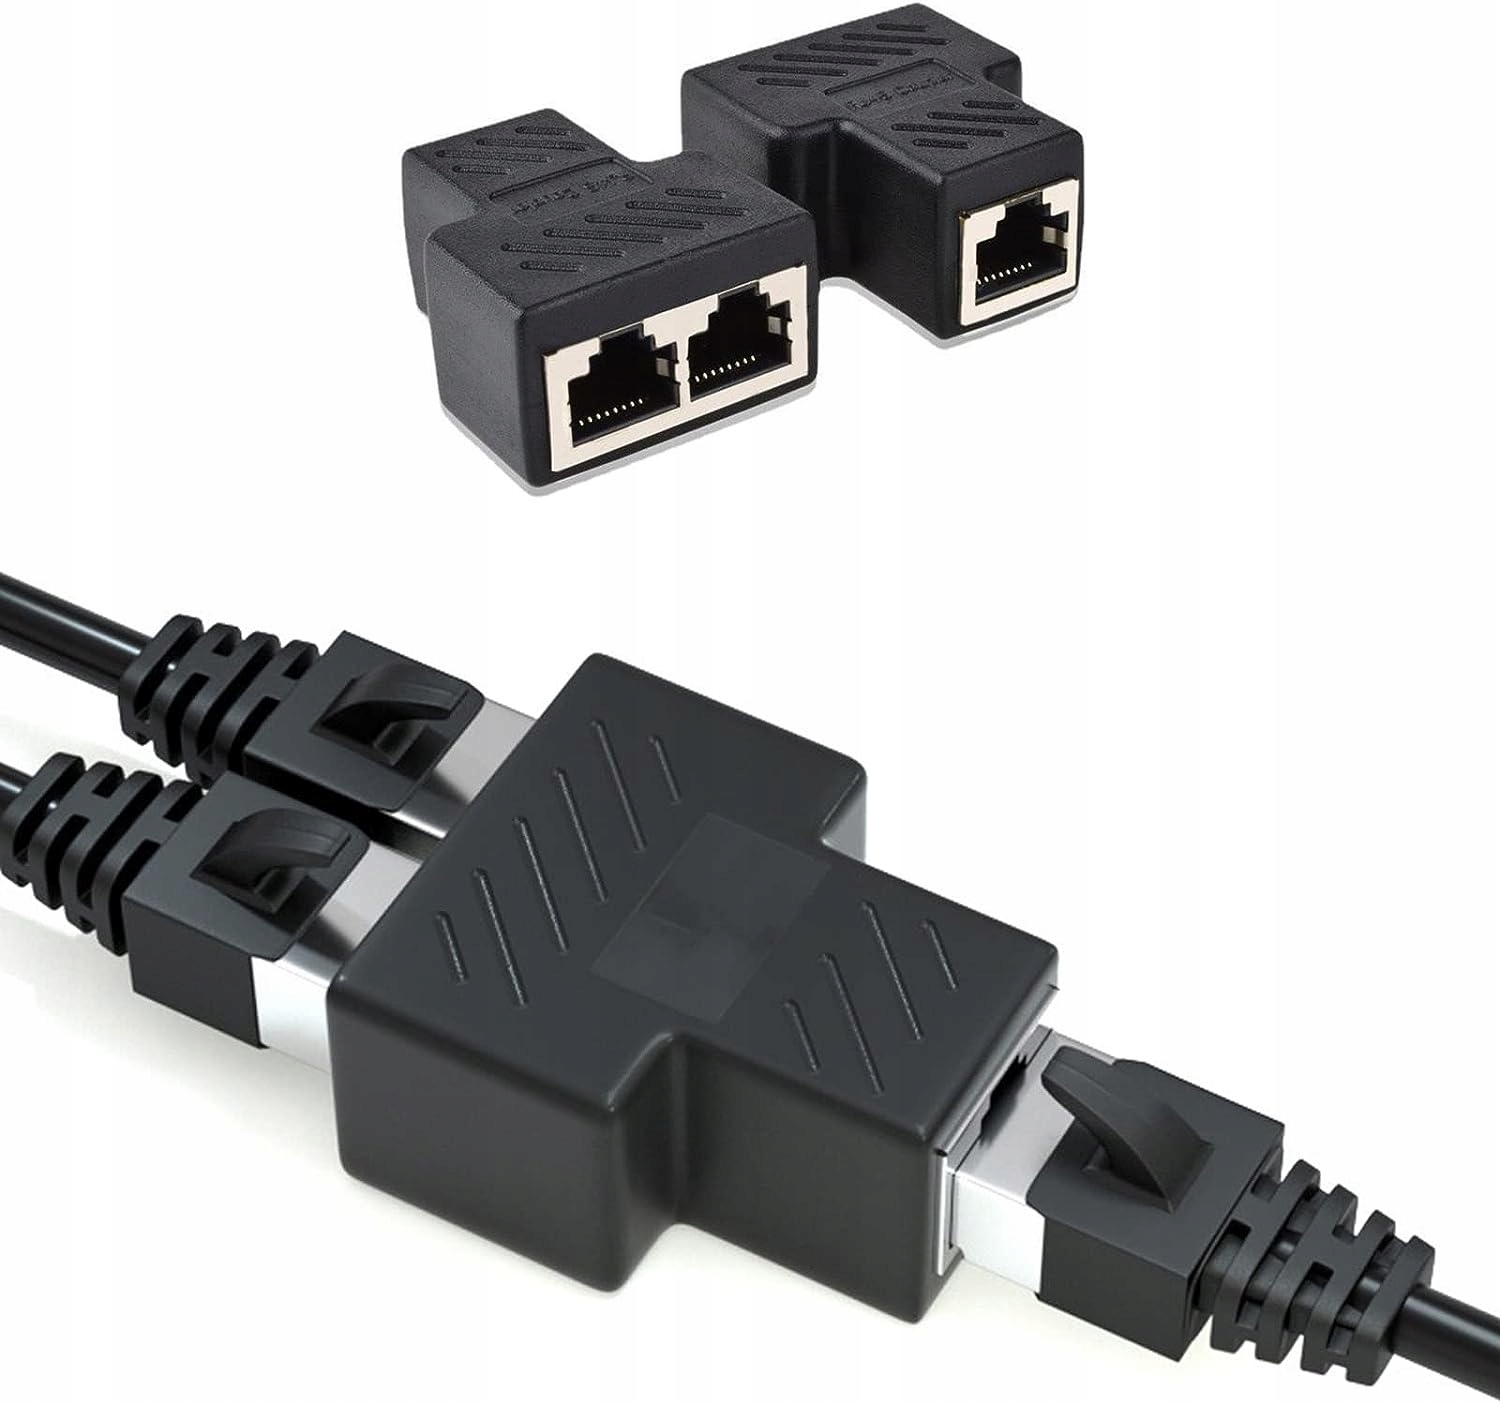  Ethernet Splitter 1 to 2 High Speed, Gigabit rj45 Ethernet LAN  Splitter Adapter Gigabit Fast Internet CAT 5 6 7 8 Network Cable Ethernet  Port Simultaiouly Two Device Multi Port Splitter HUB : Electronics